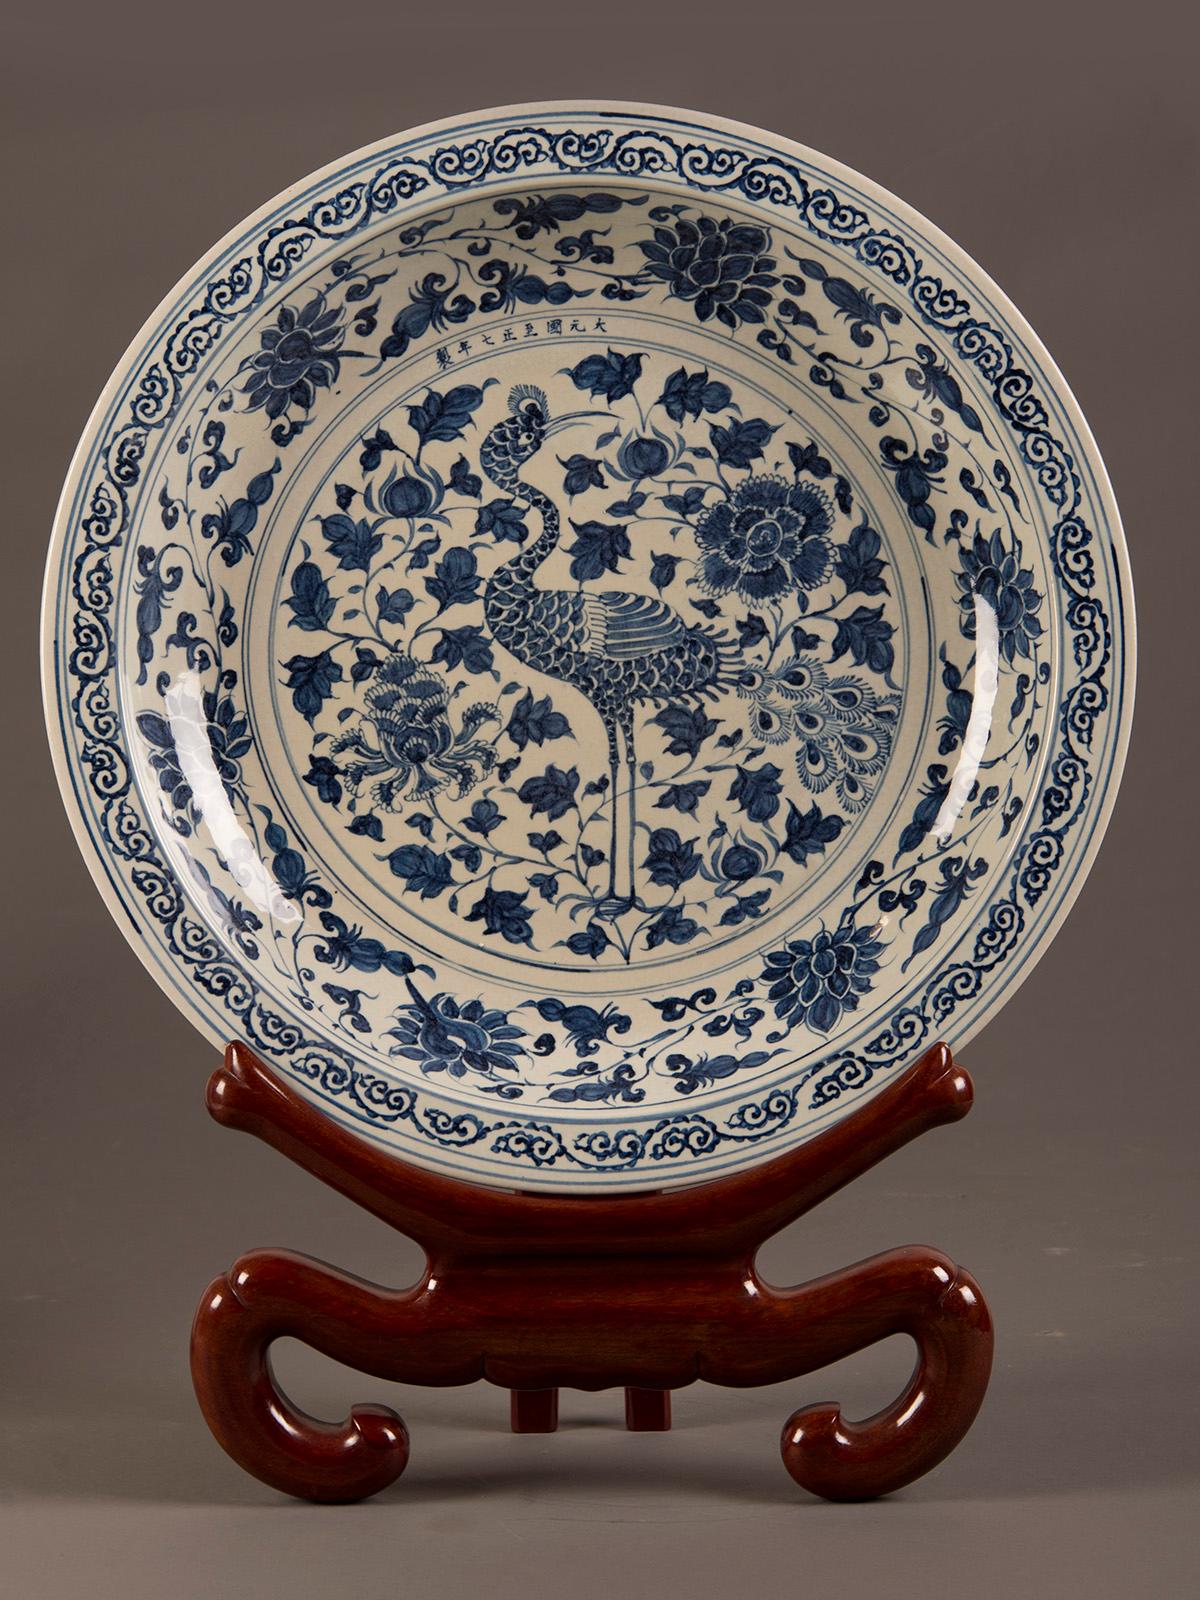 A grand scale hand painted Chinese blue and white glazed shallow bowl from China. The striking image of the crane with its distinctive stance amidst a floral fantasia is the focal point of this large piece displayed on a substantial rosewood colored